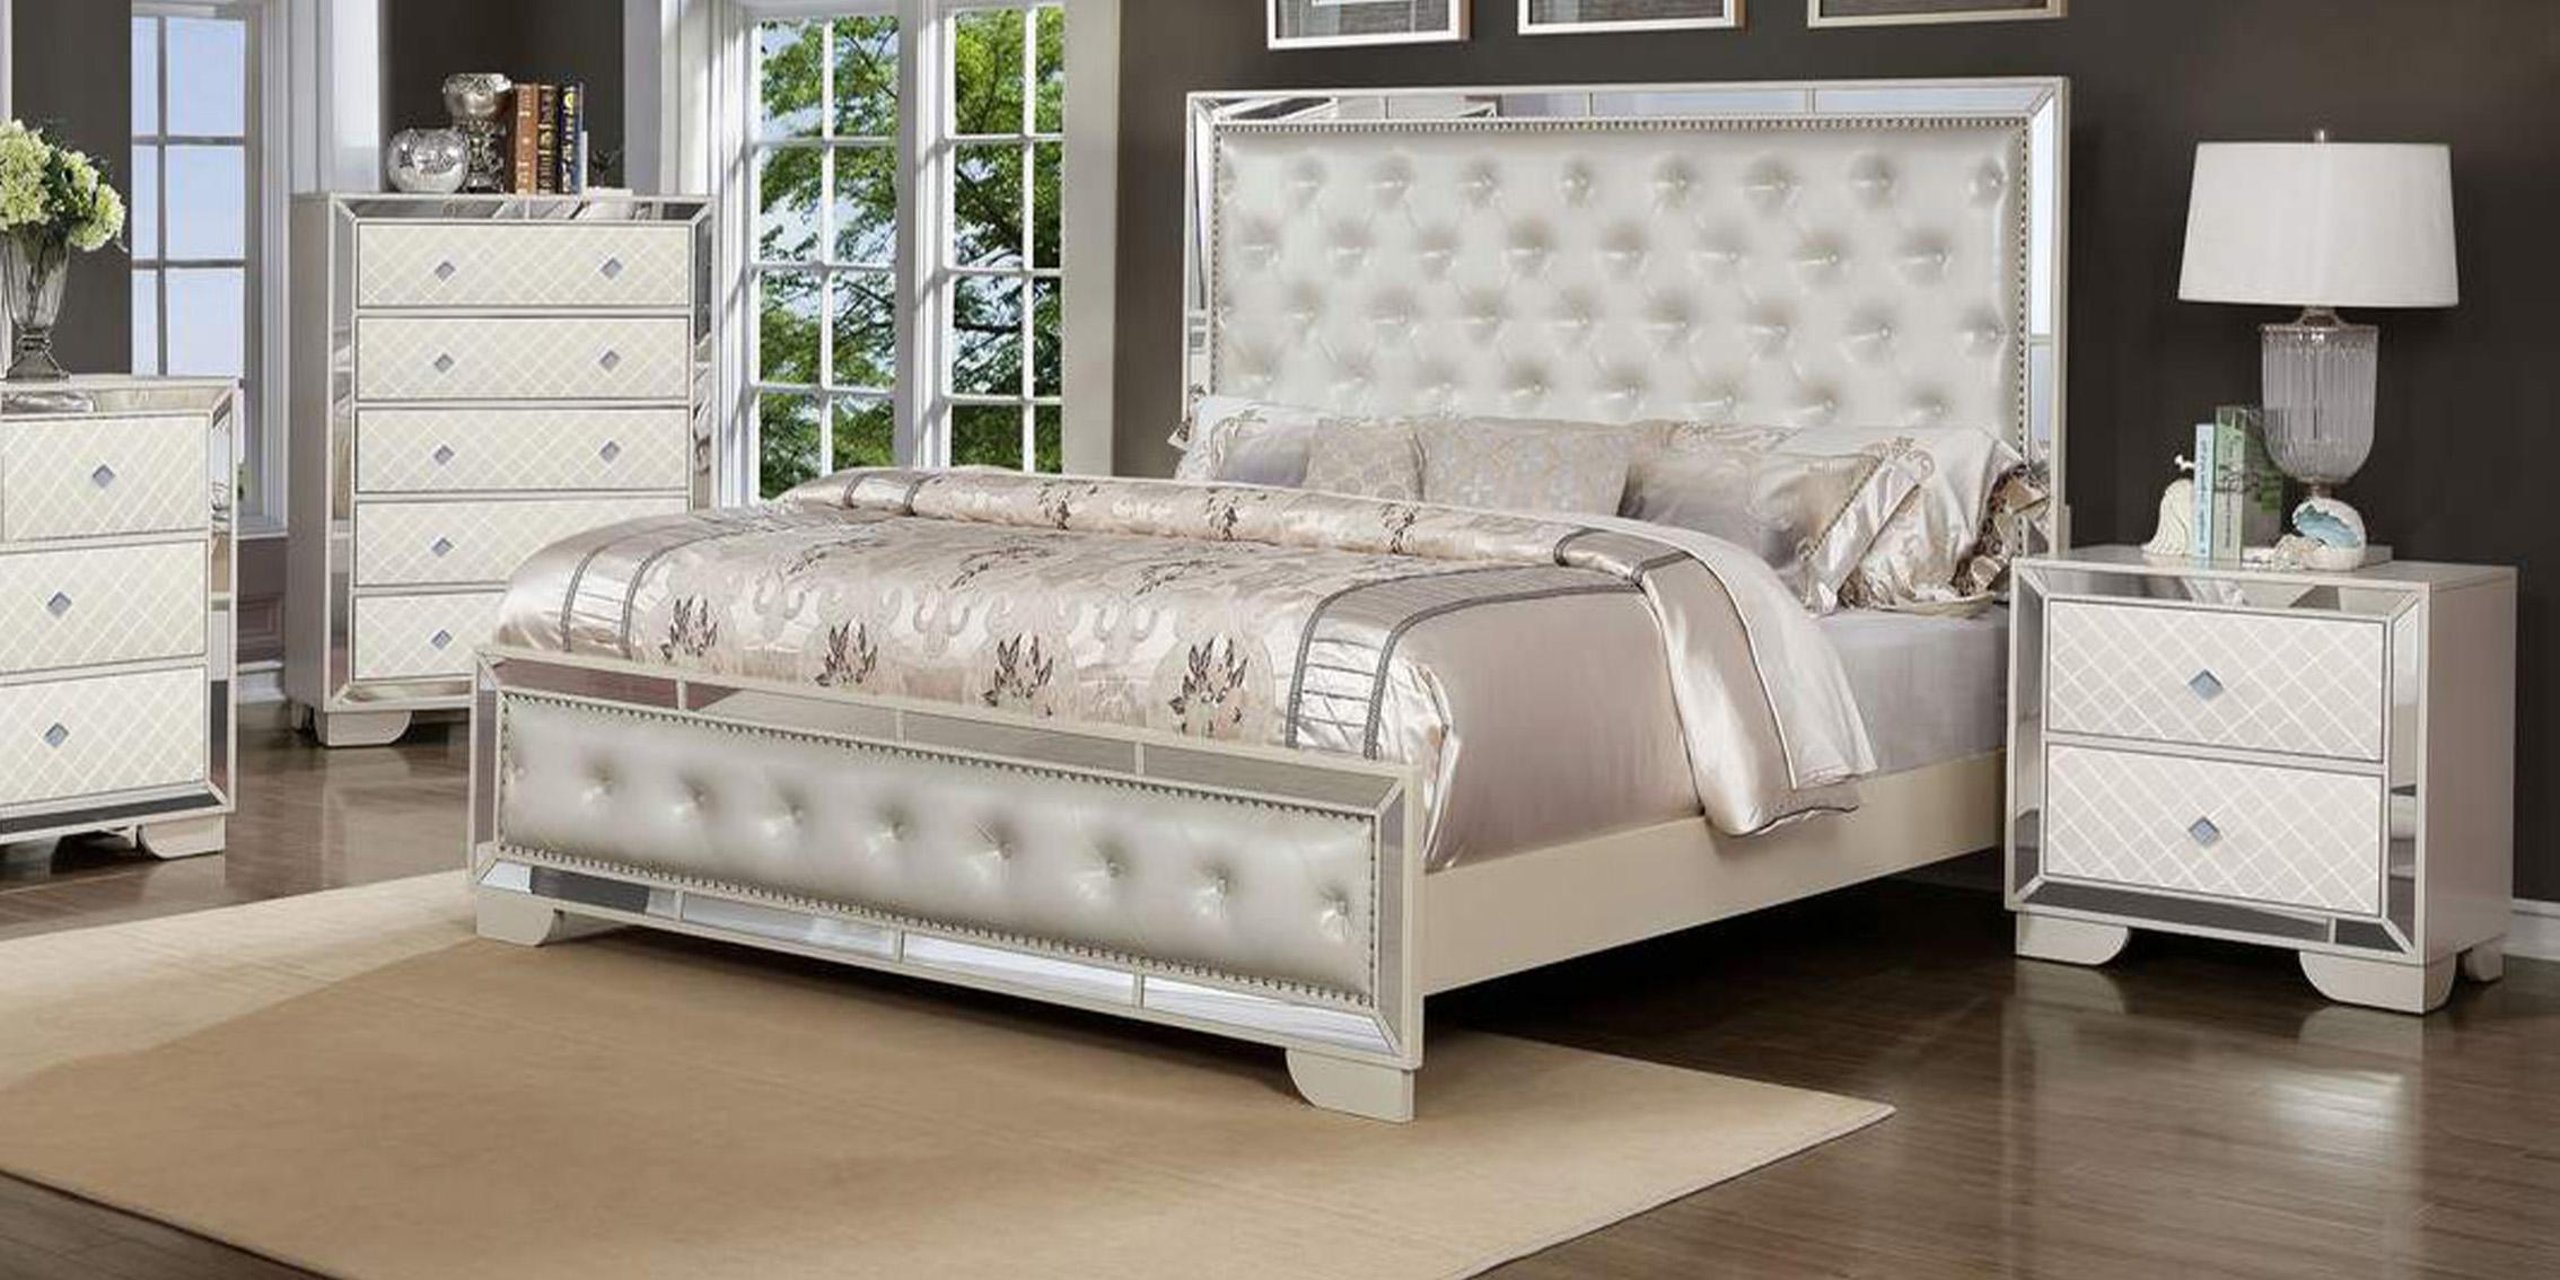 Glam Beige Mirrored Inlay Tufted Queen Bedroom Set 5P MADISON Galaxy ...